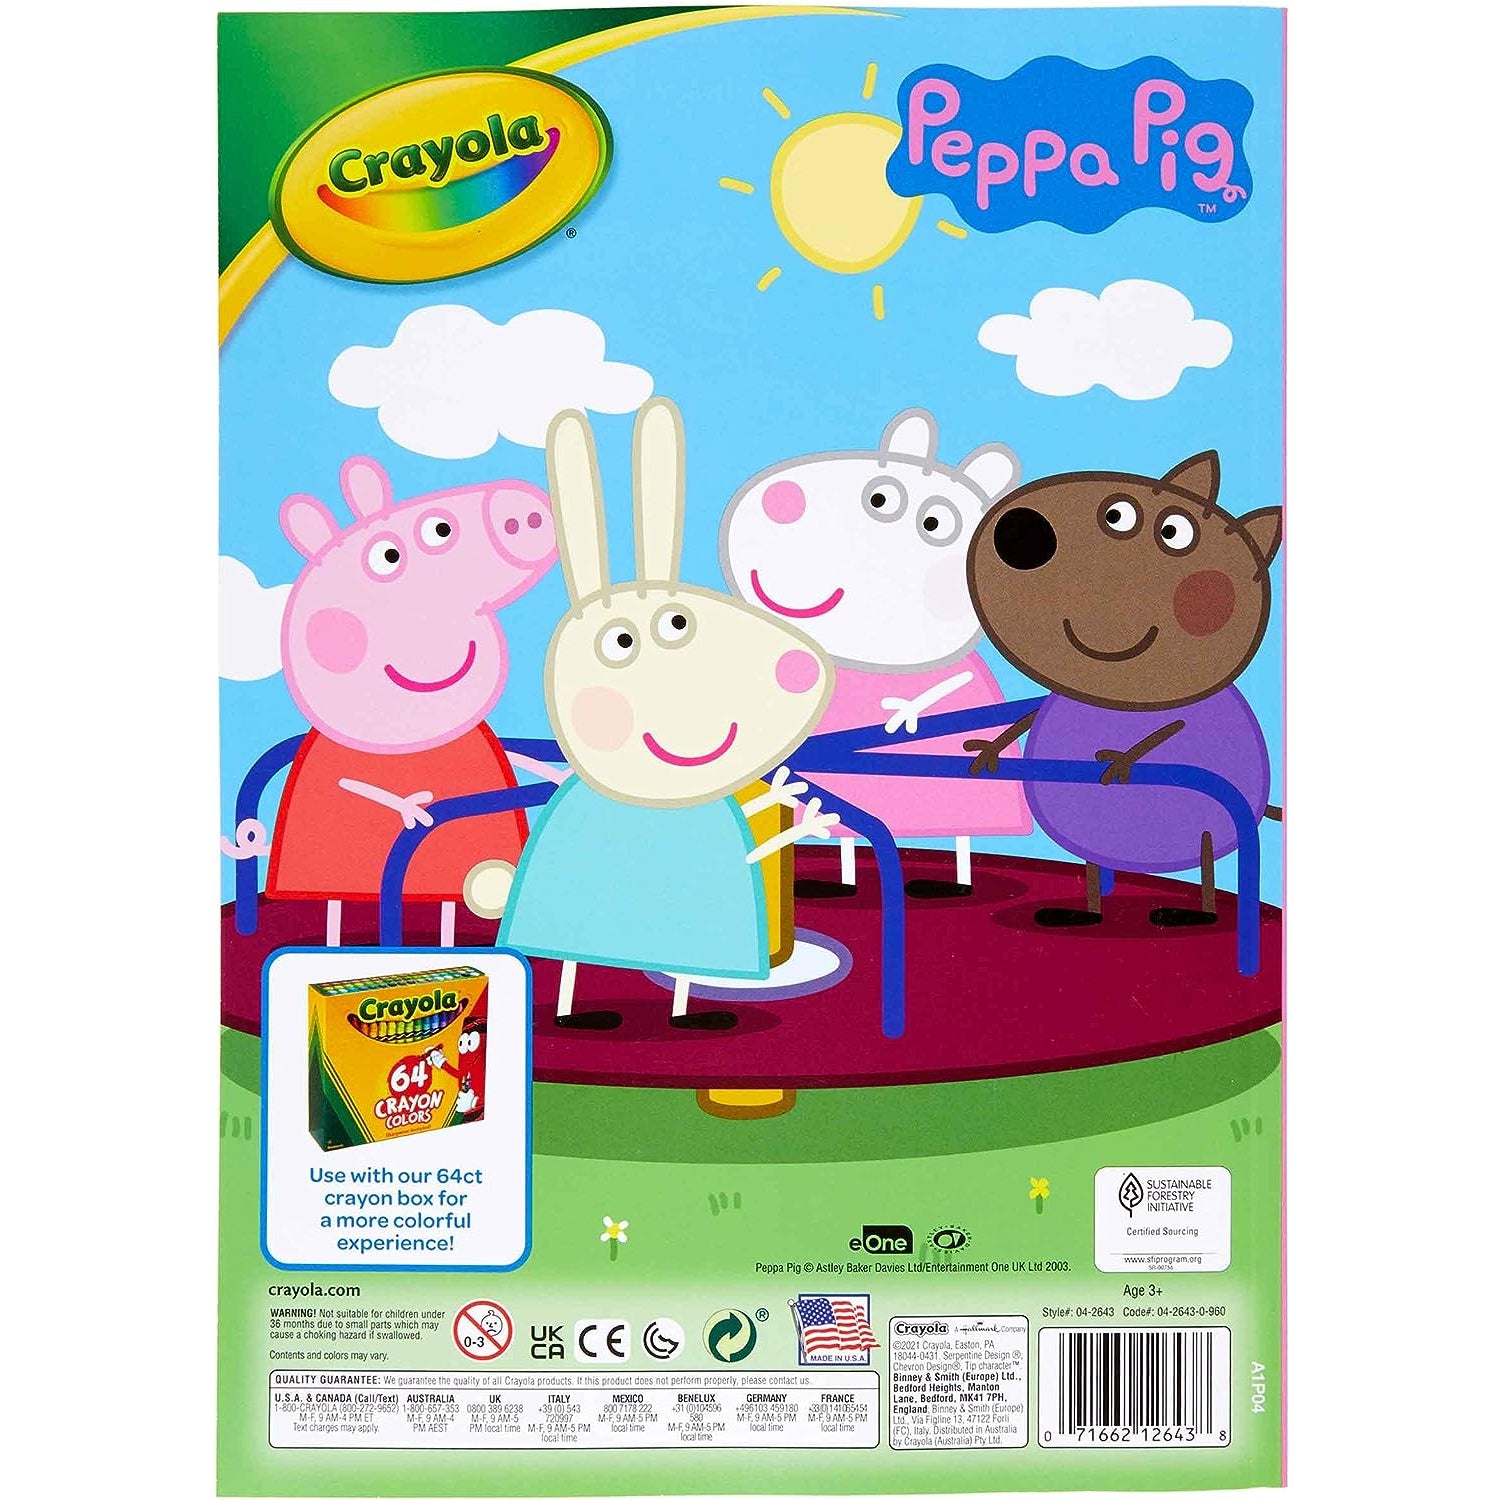 Crayola Peppa Pig Coloring Book with Stickers, Gift for Kids, 96 Pages